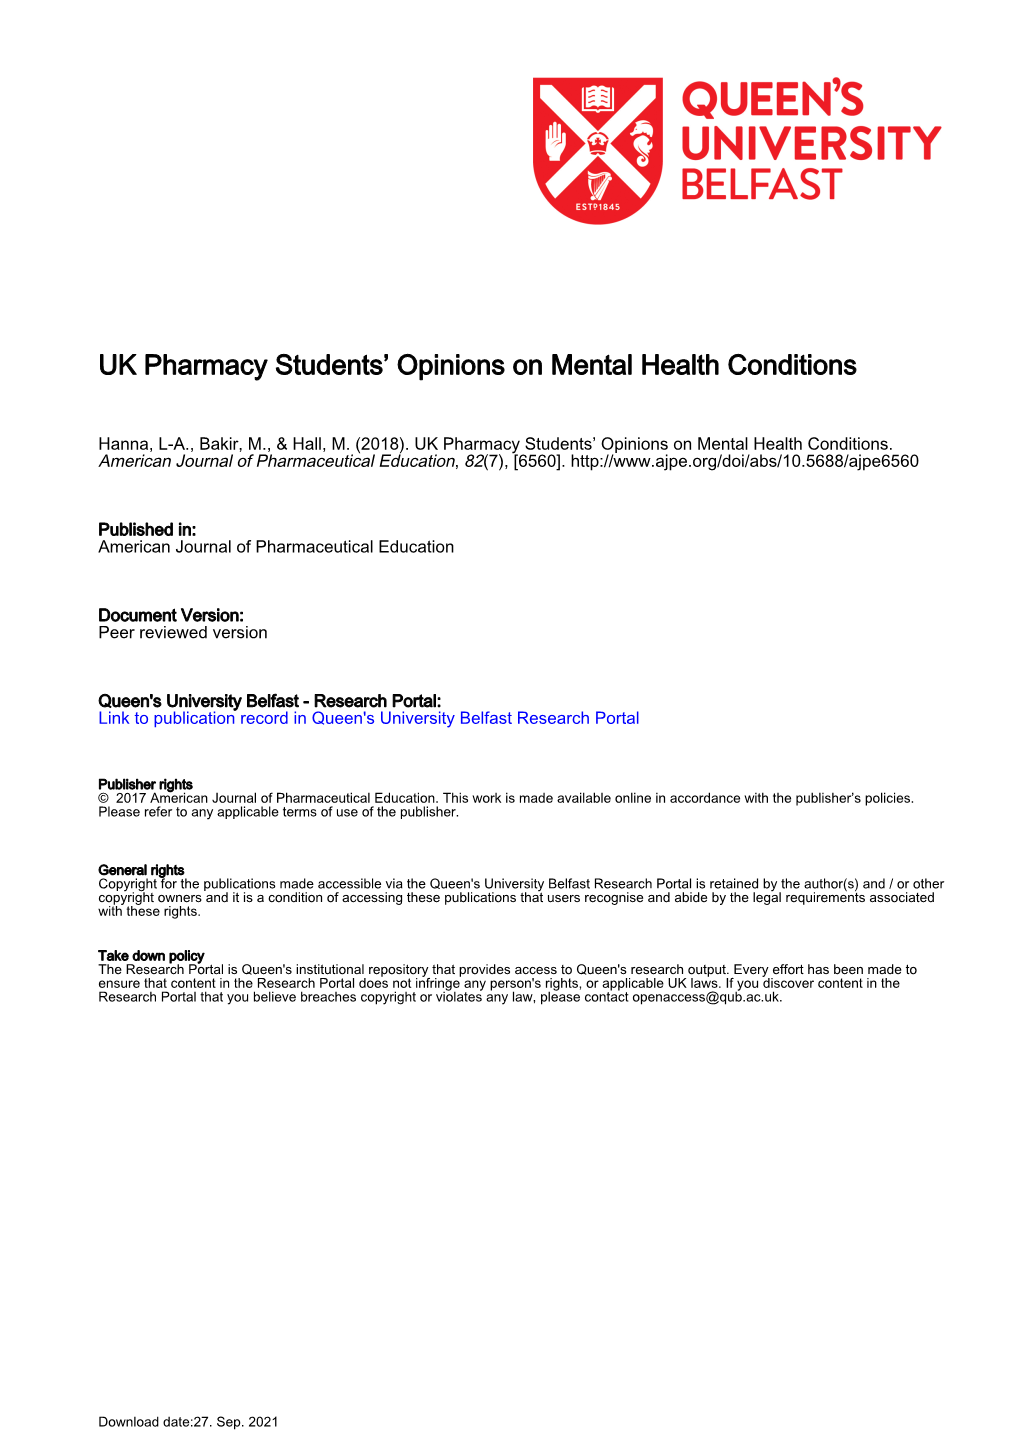 UK Pharmacy Students' Opinions on Mental Health Conditions